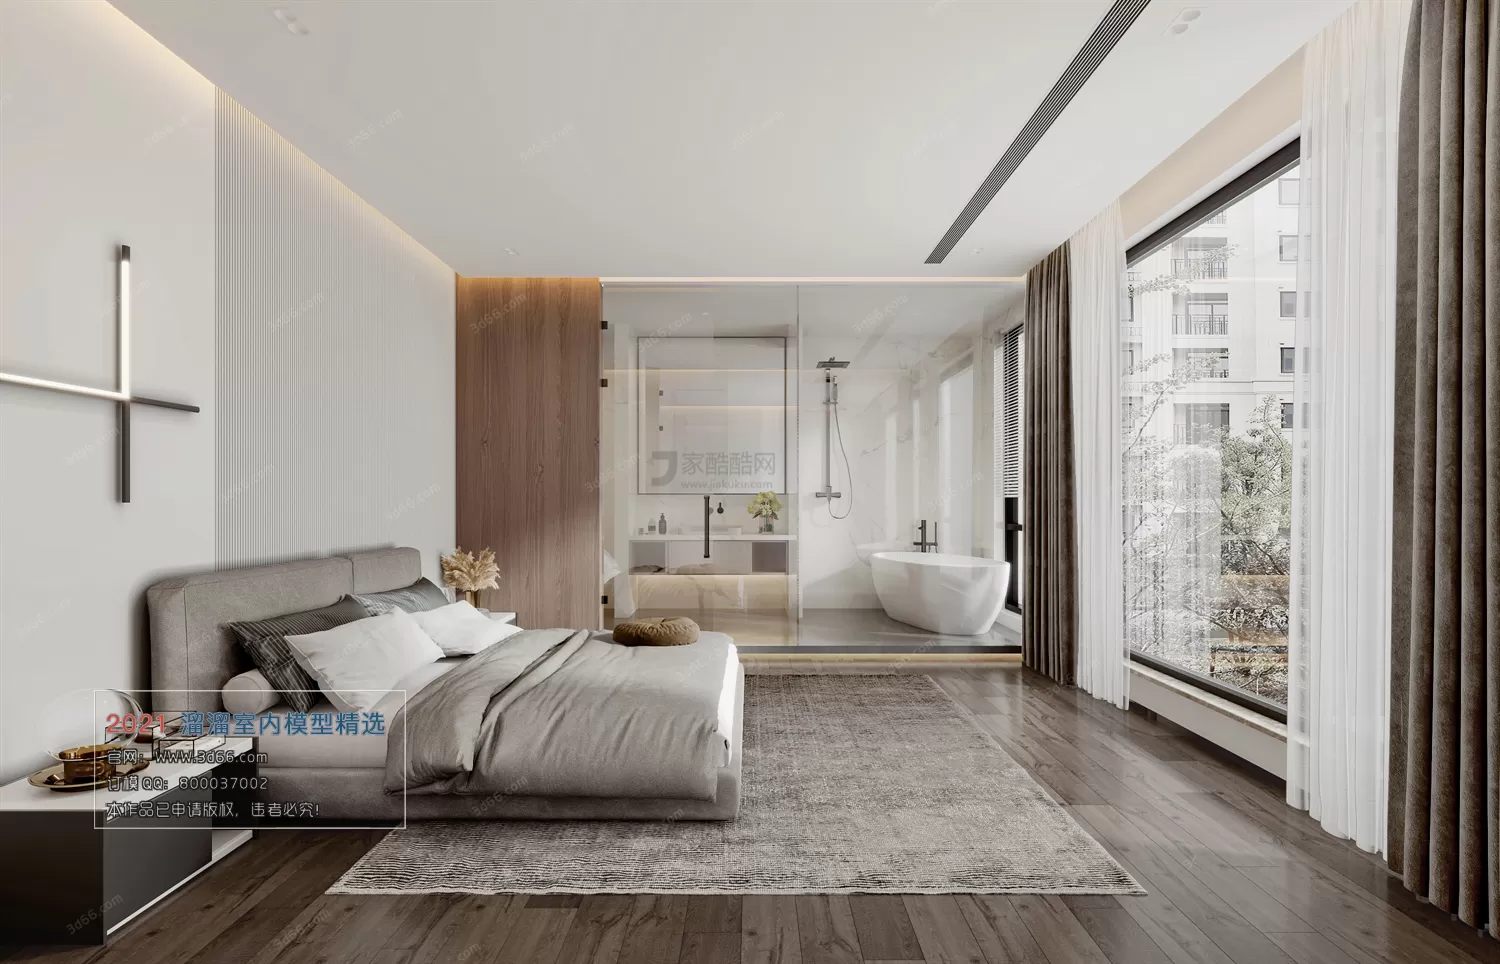 HOTEL SUITE – A002-Modern style-Vray model